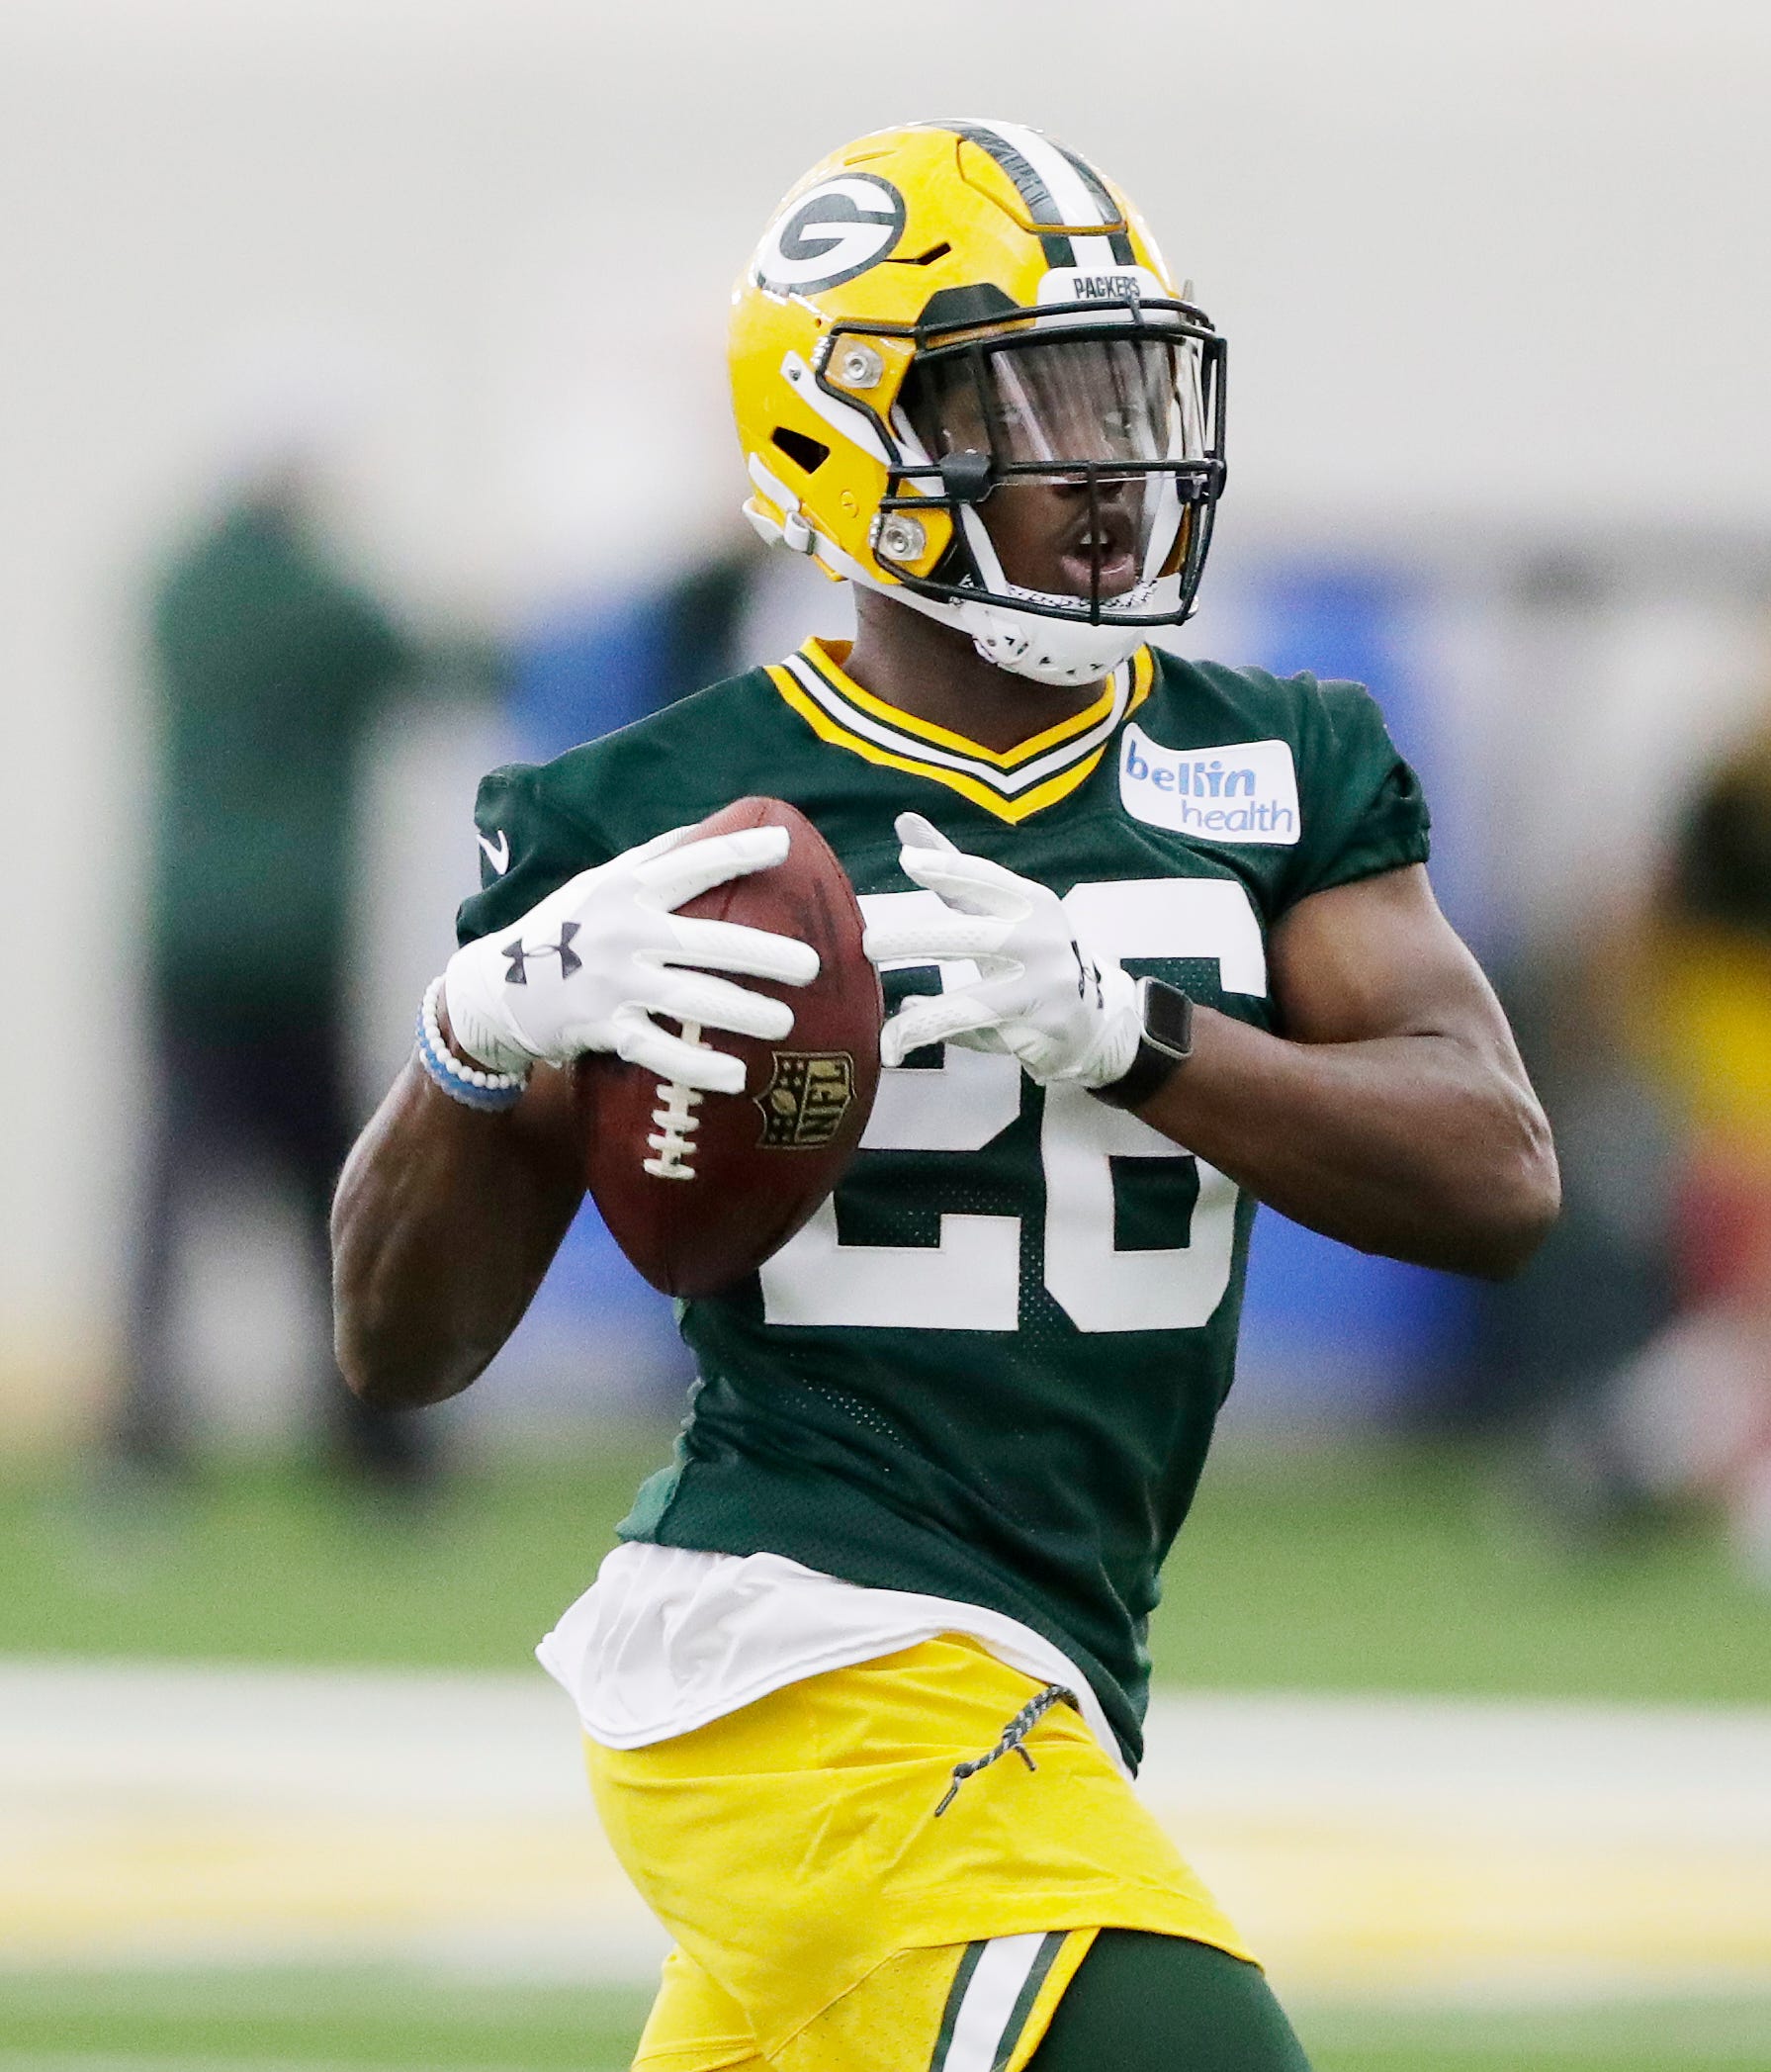 Green Bay Packers safety Darnell Savage (26) during practice at rookie minicamp at the Don Hutson Center on Friday, May 3, 2019 in Ashwaubenon, Wis.
Adam Wesley/USA TODAY NETWORK-Wis